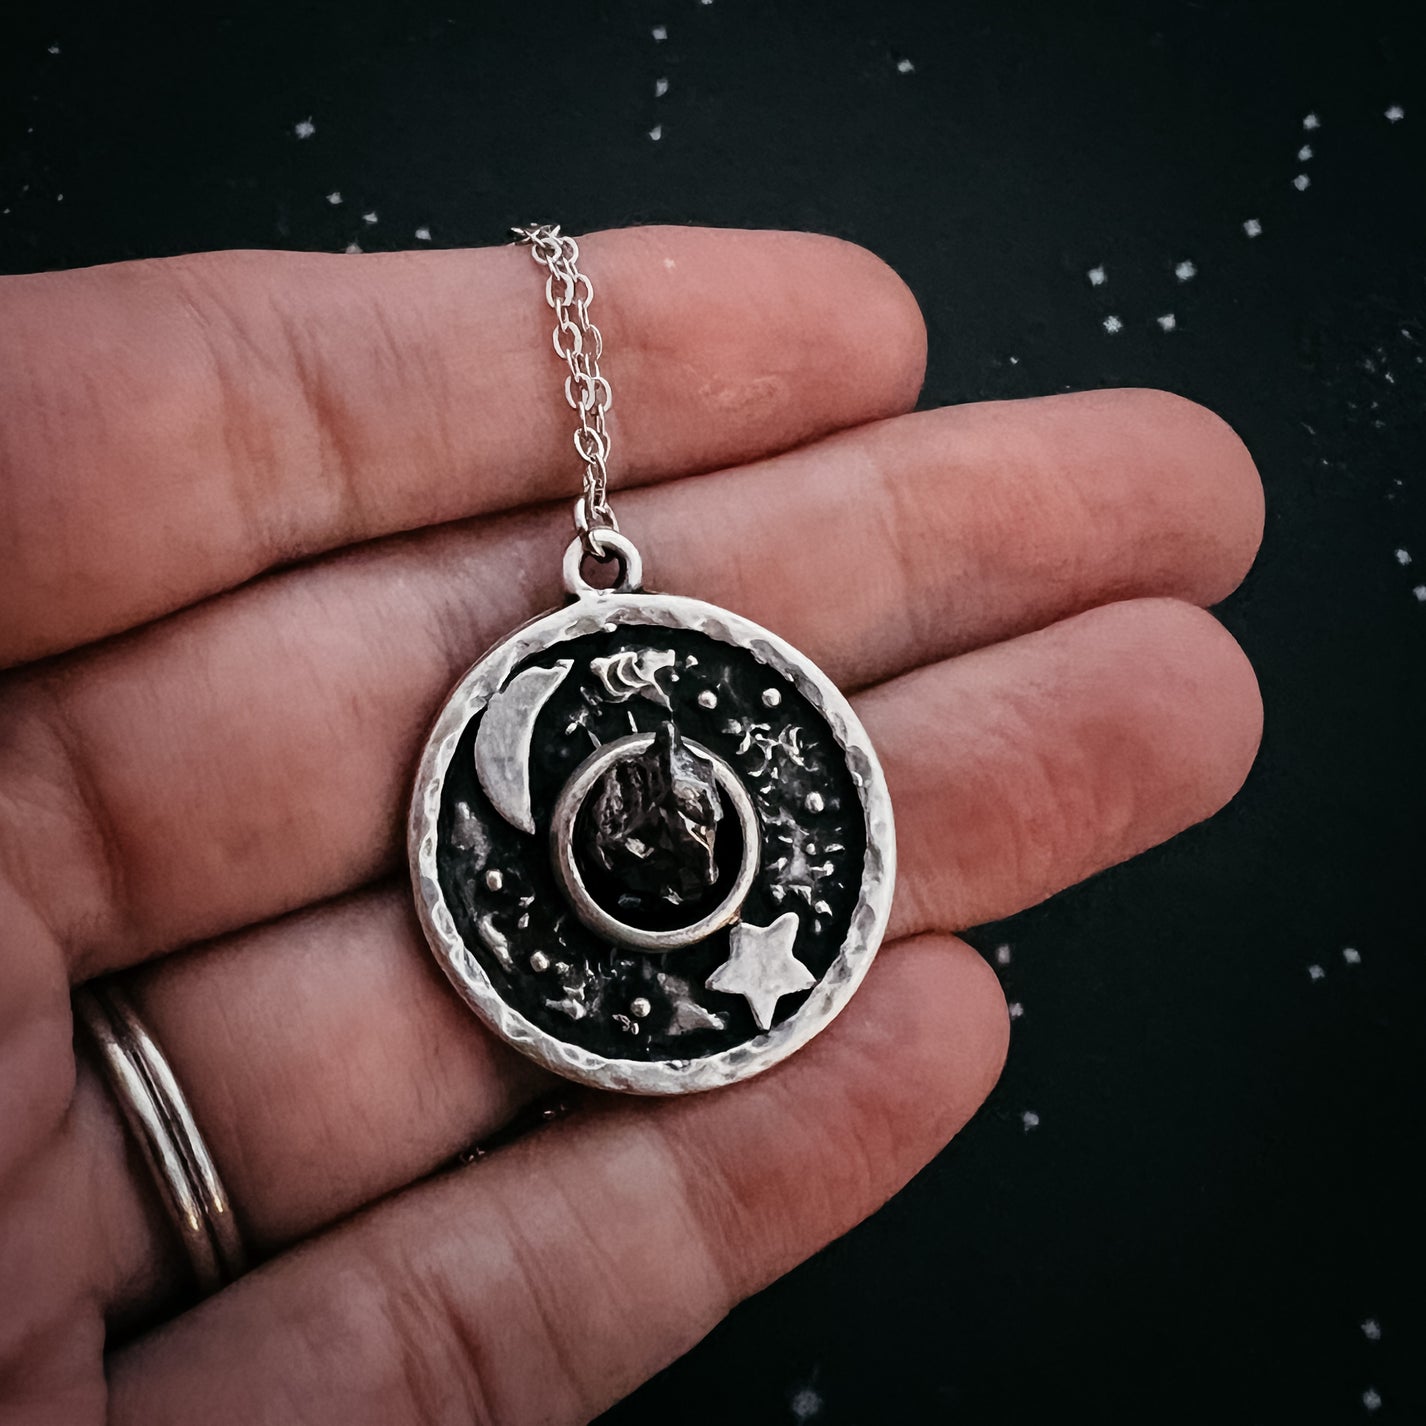 Night Sky Pendant Necklace with Authentic Meteorite